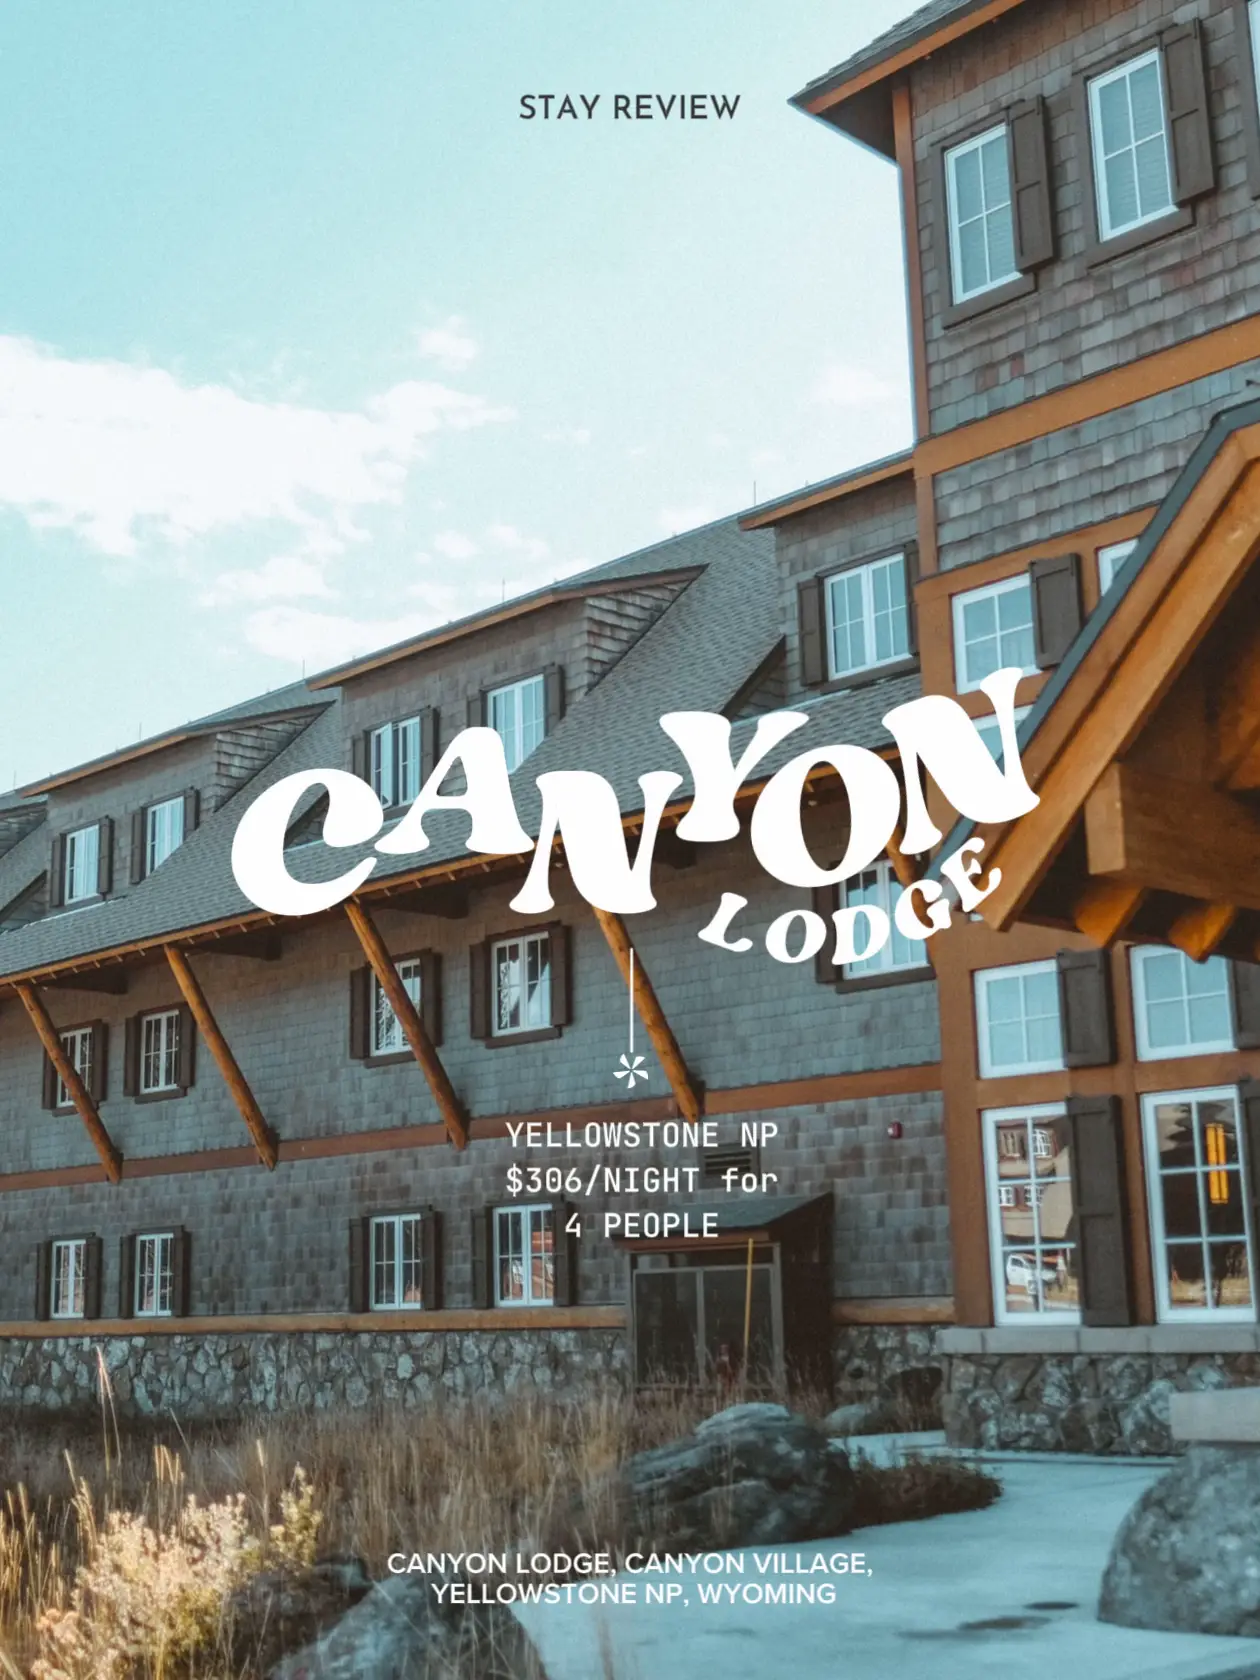 Stay Review, Canyon Lodge, Yellowstone NP 👀, Gallery posted by reisha